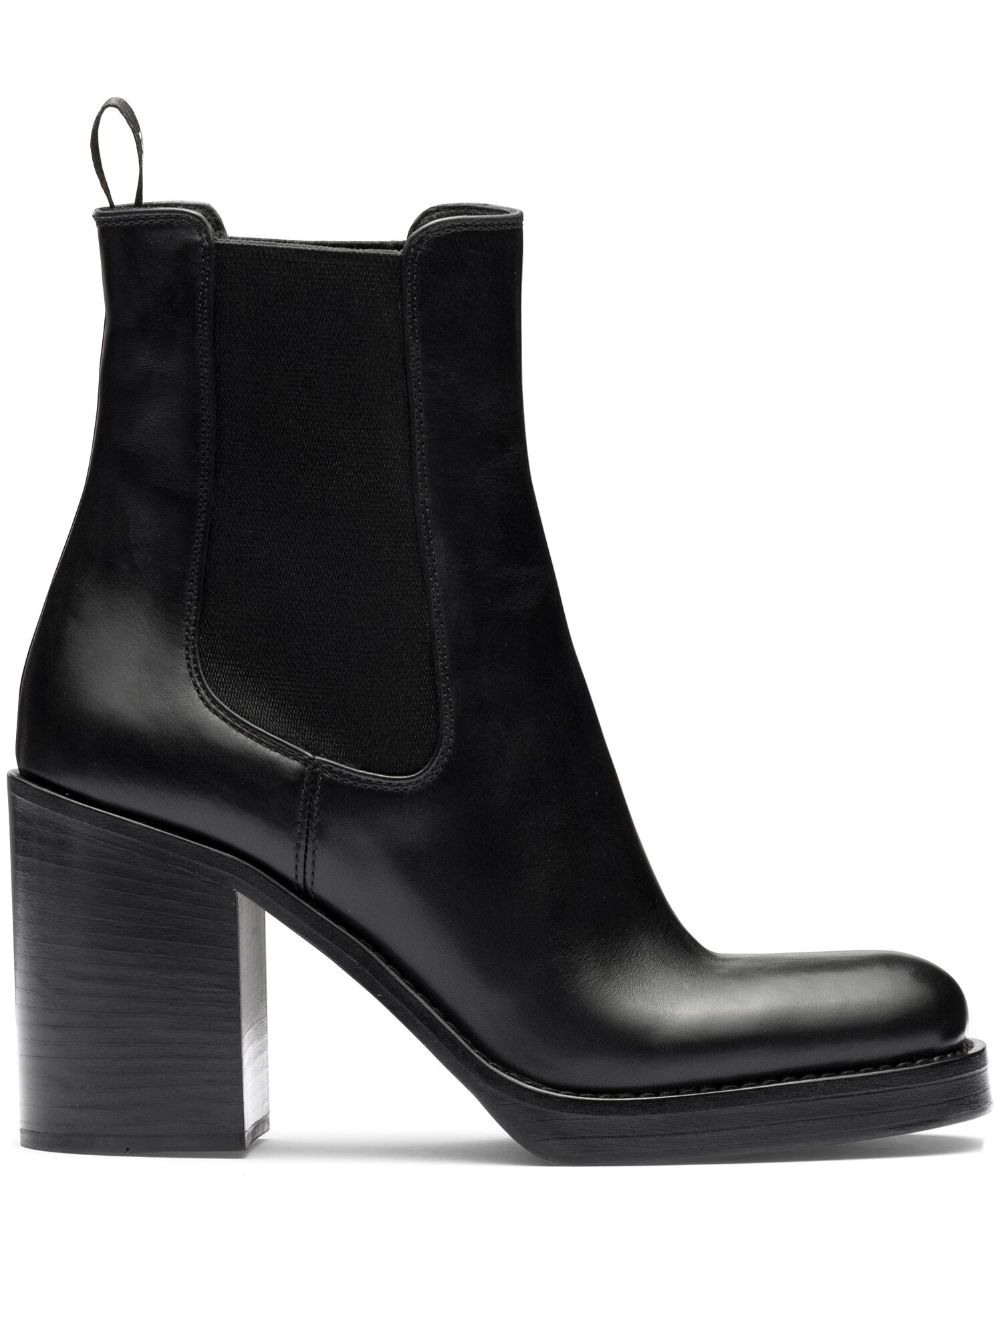 Prada brushed leather 85mm ankle boots - Black